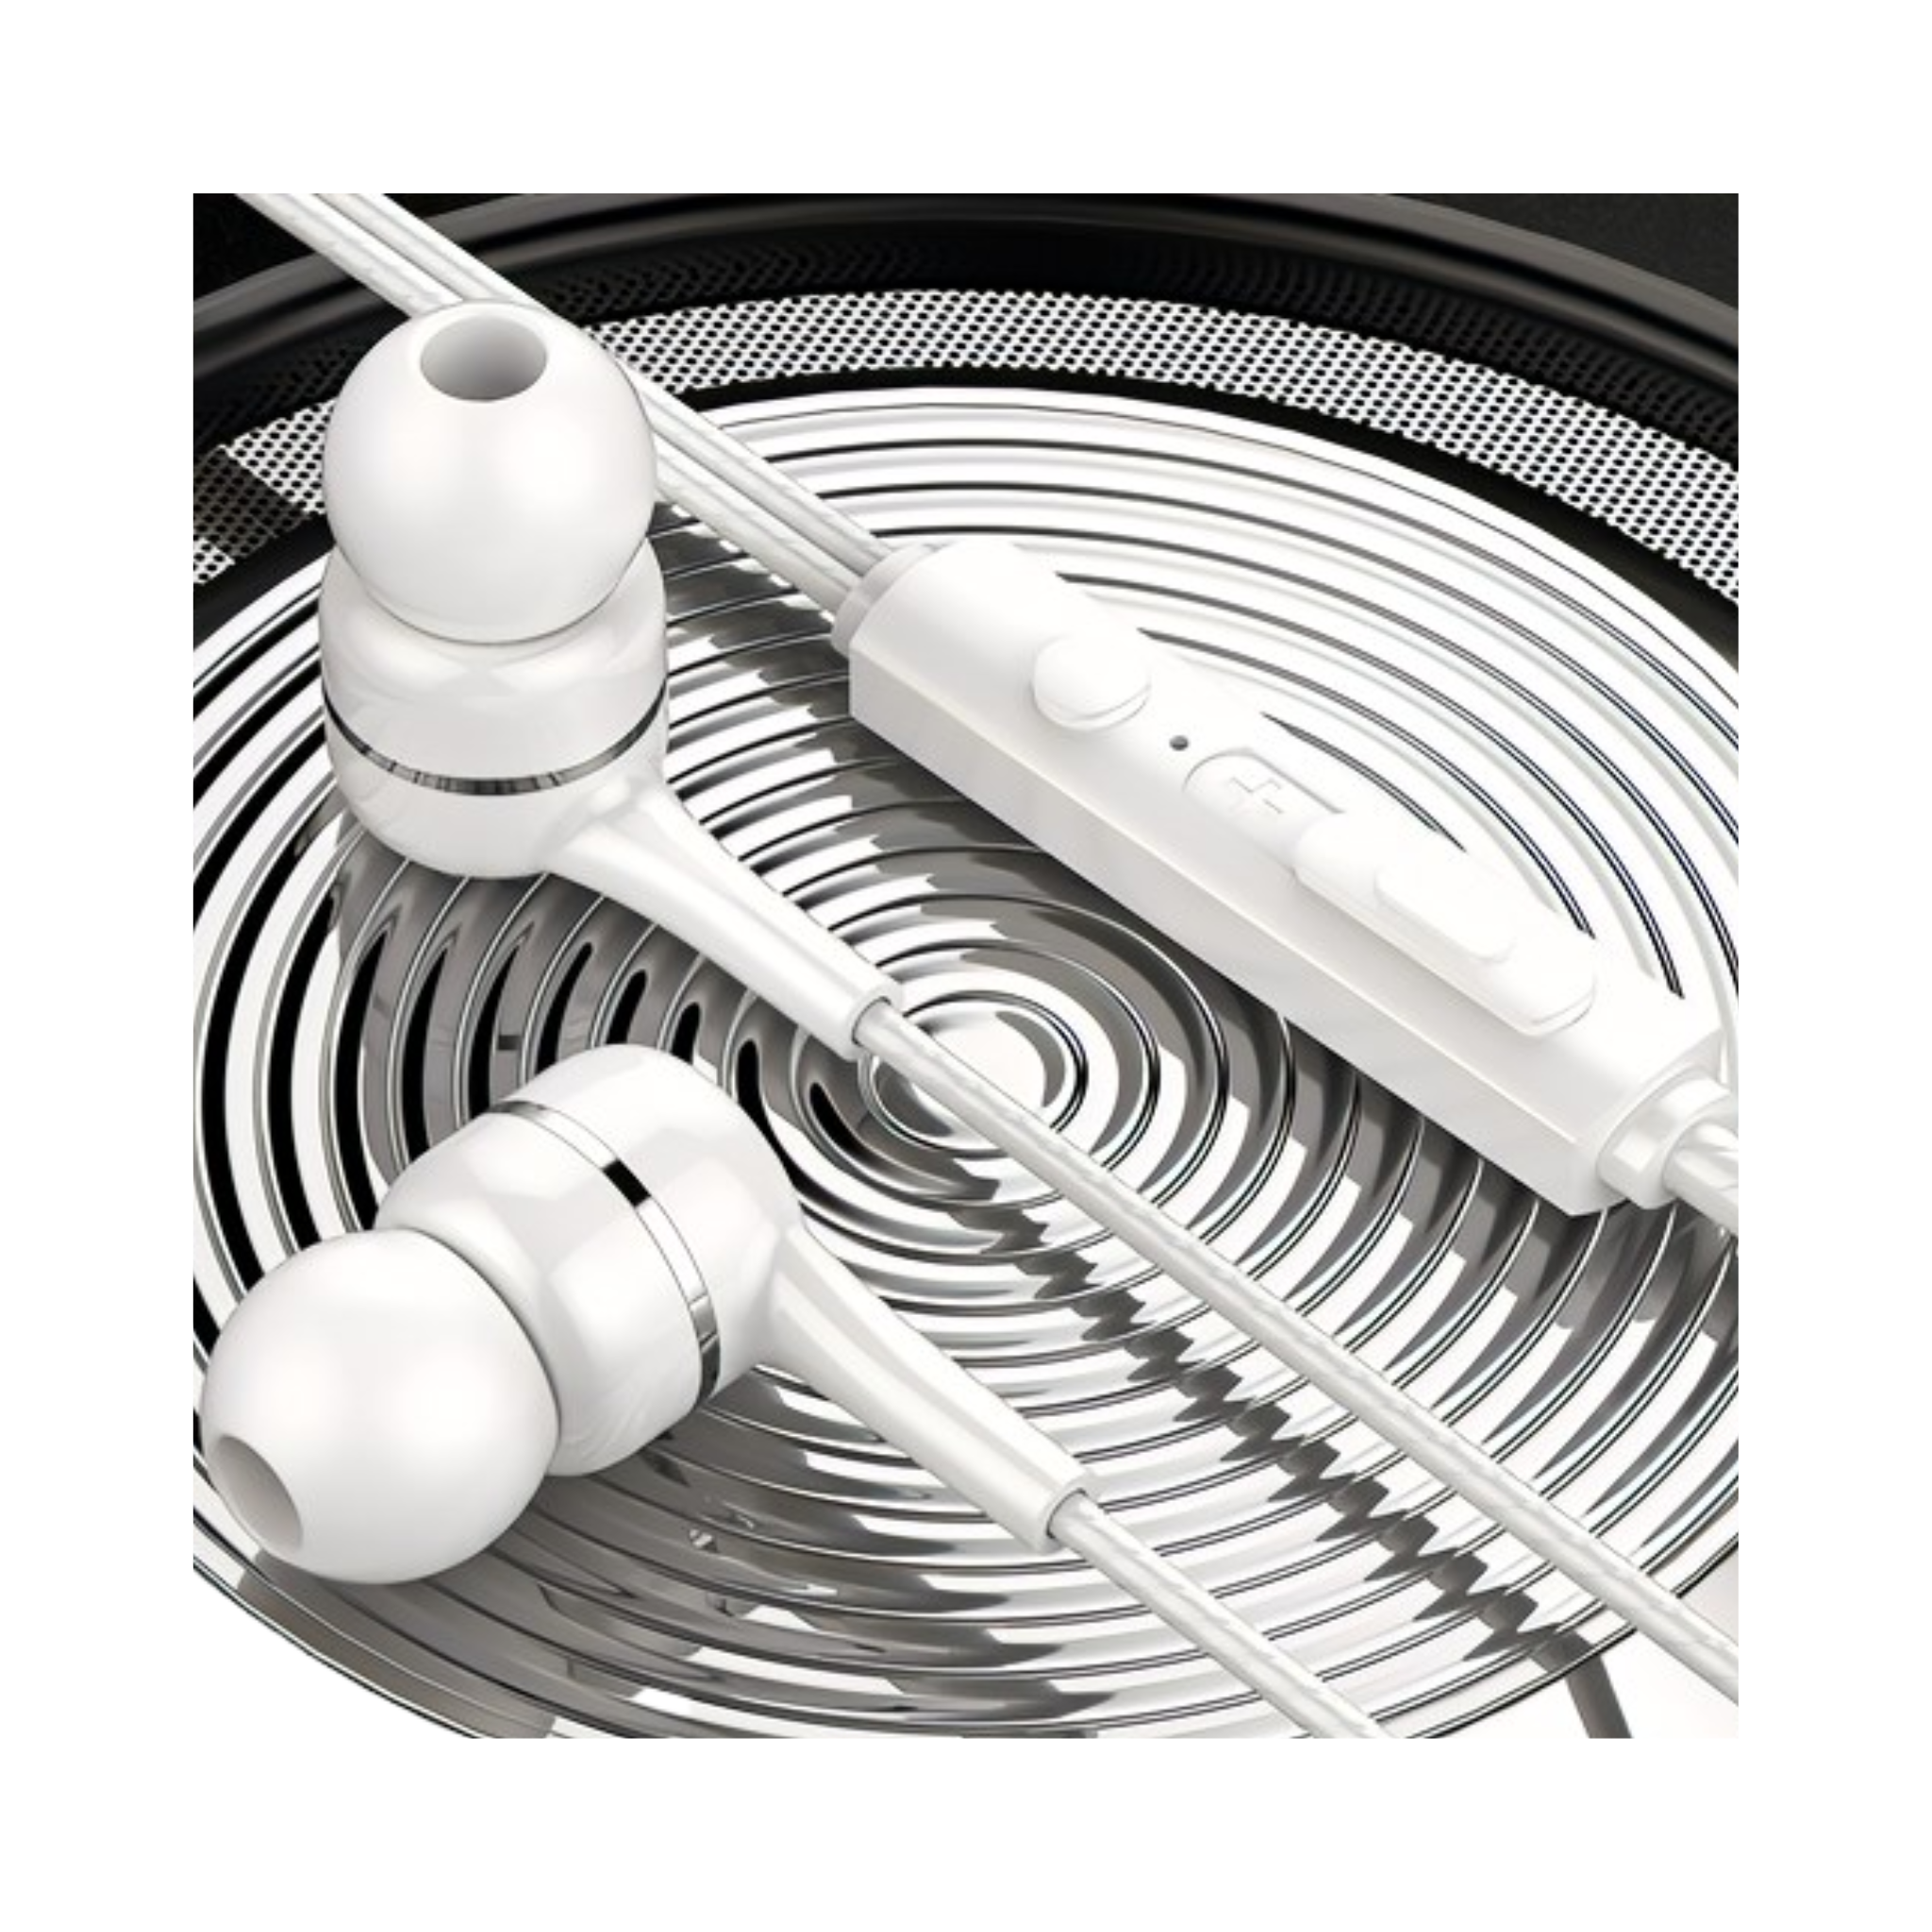 Handsfree, In-Ear Headphones, Universal, for Android Phone